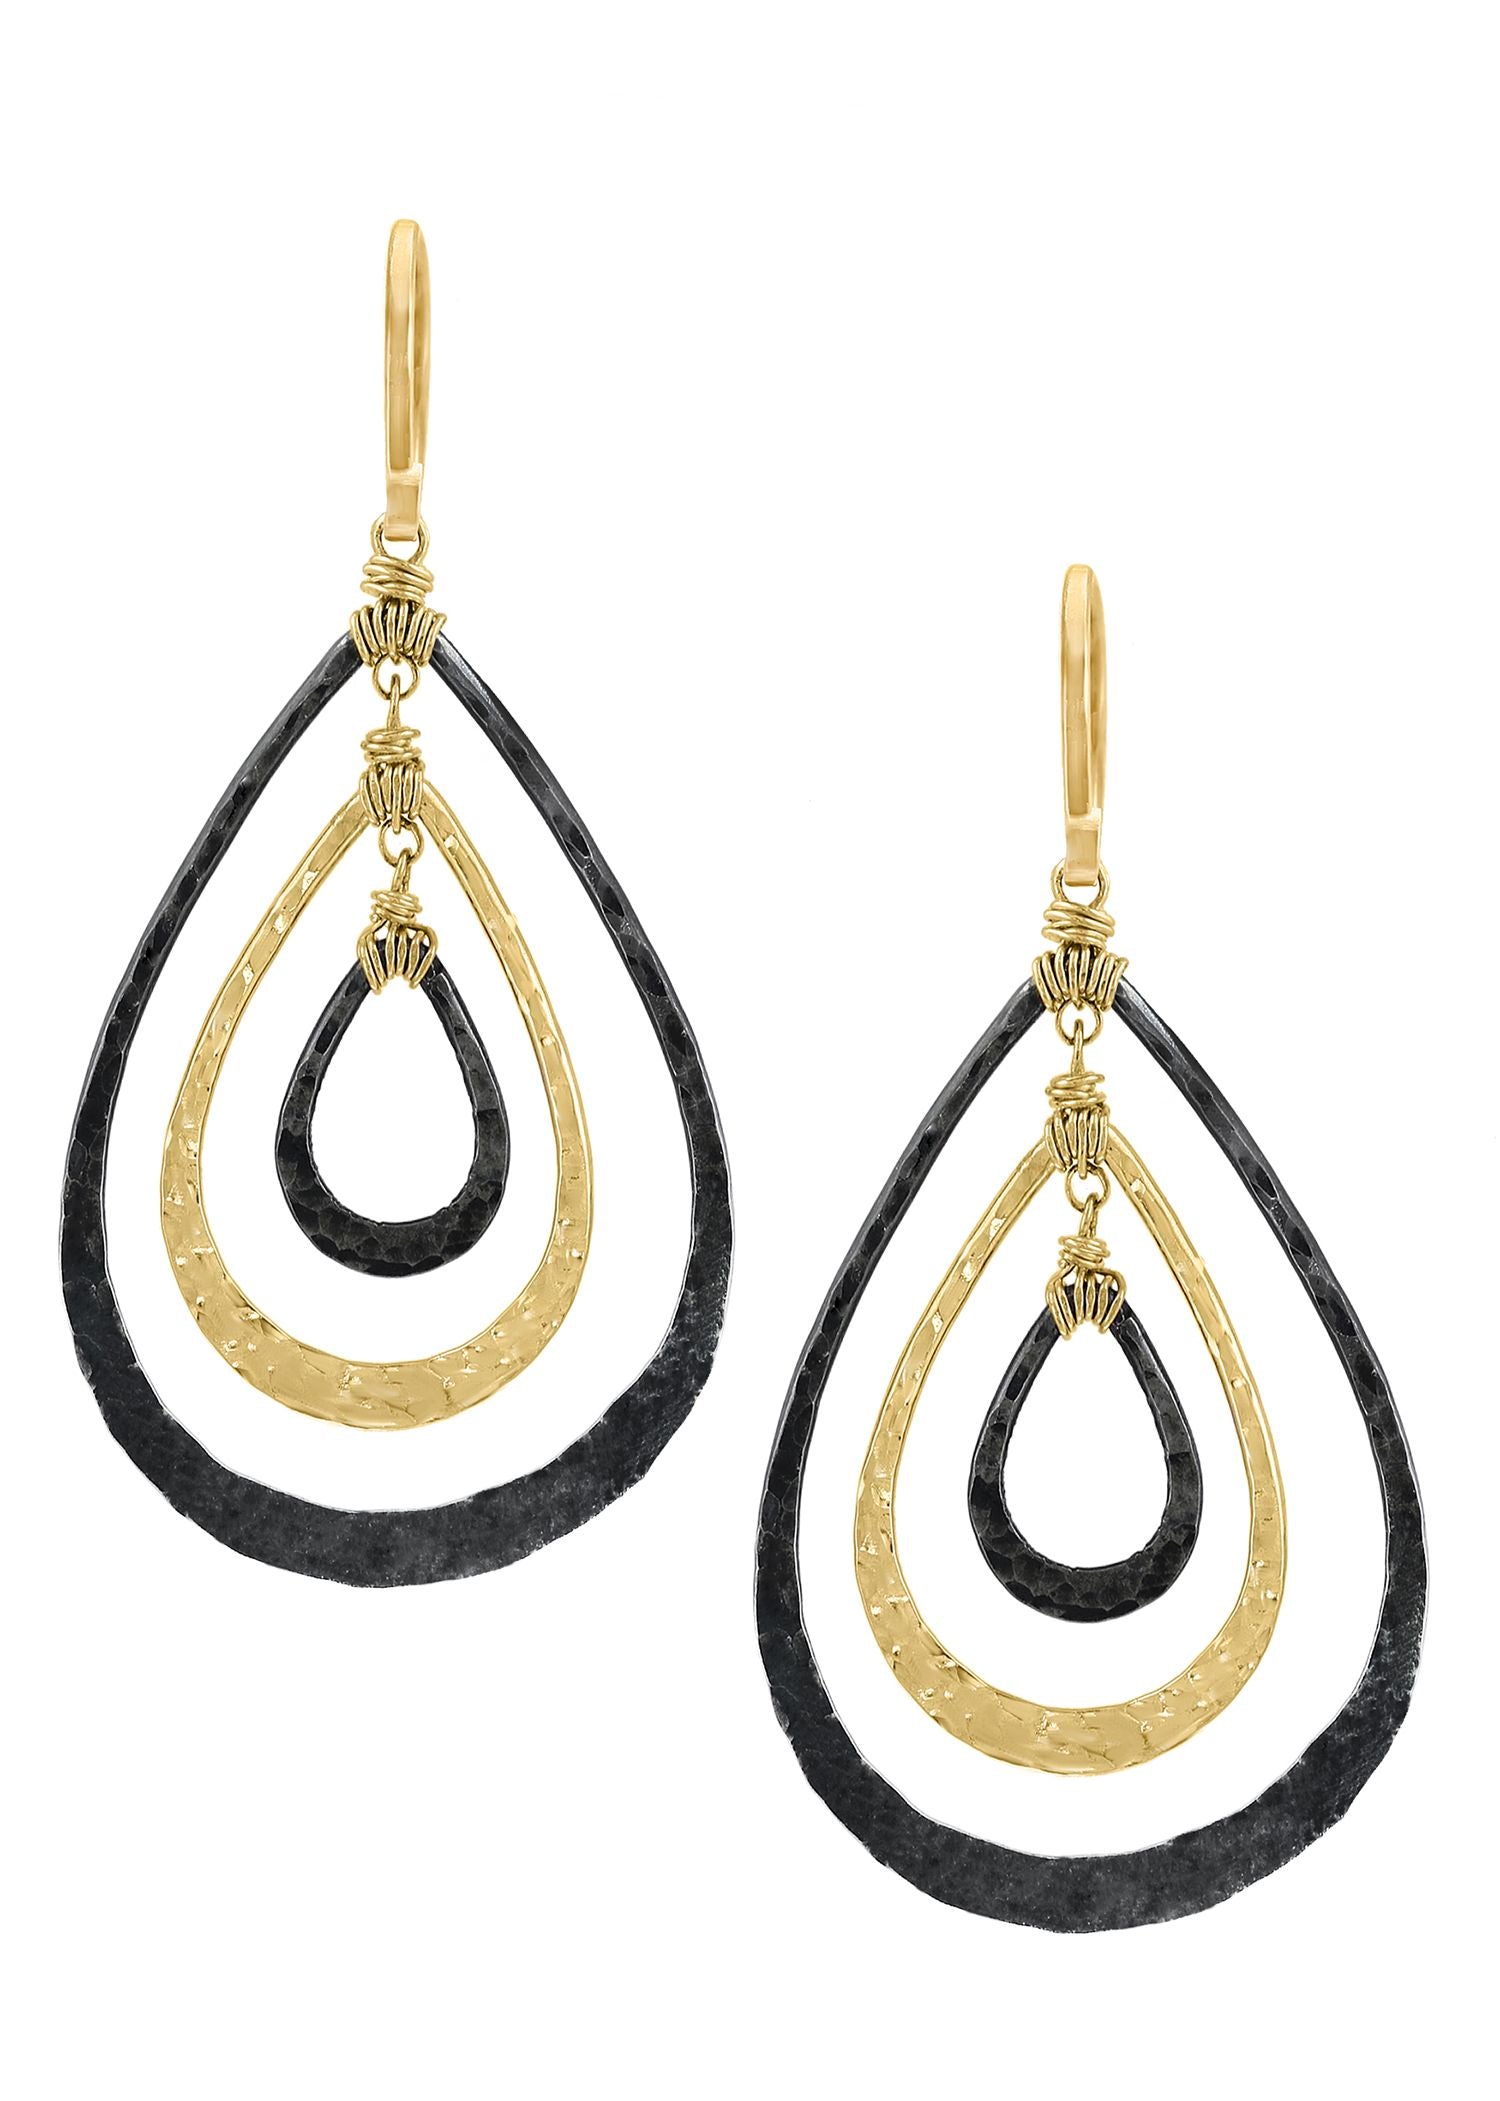 14k gold fill Blackened sterling silver Mixed metal Earrings measure 1-3/4" in length (including the ear wires) and 7/8" in width Handmade in our Los Angeles studio